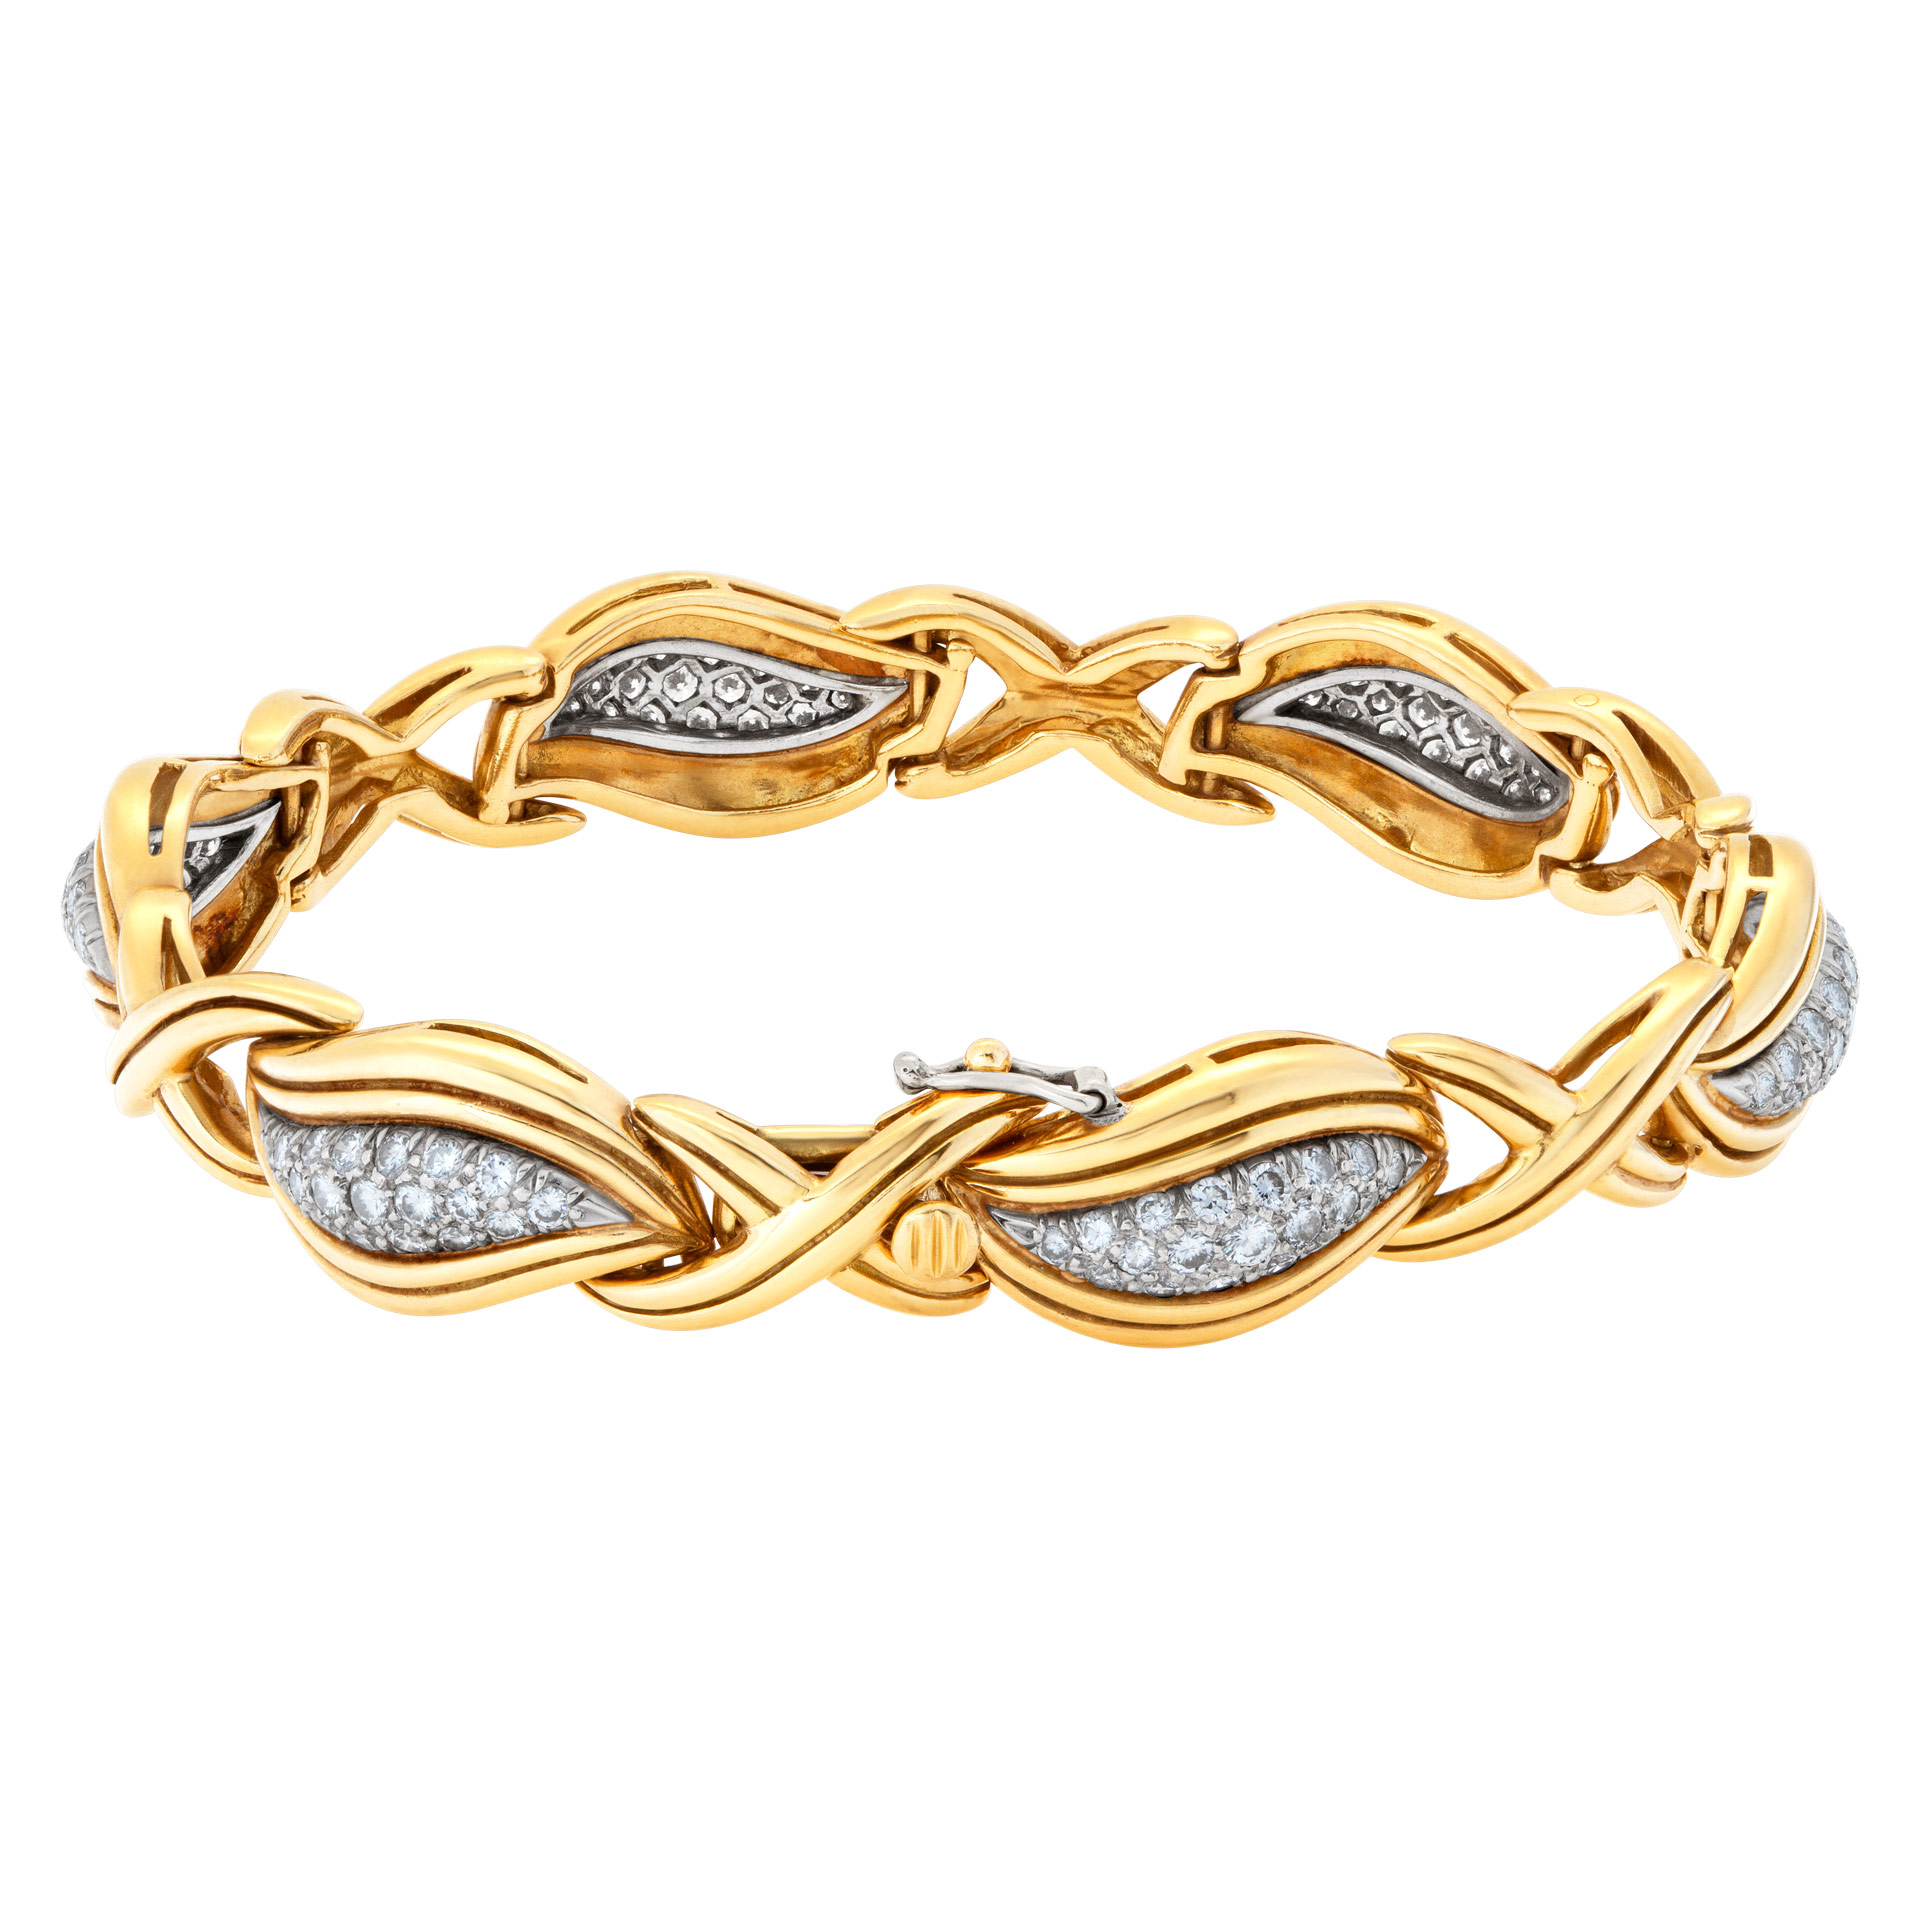 Stylish "Hugs & Kisses" bracelet with over 3.50 carats full cut round brilliant diamonds set in 18K yellow gold. image 1